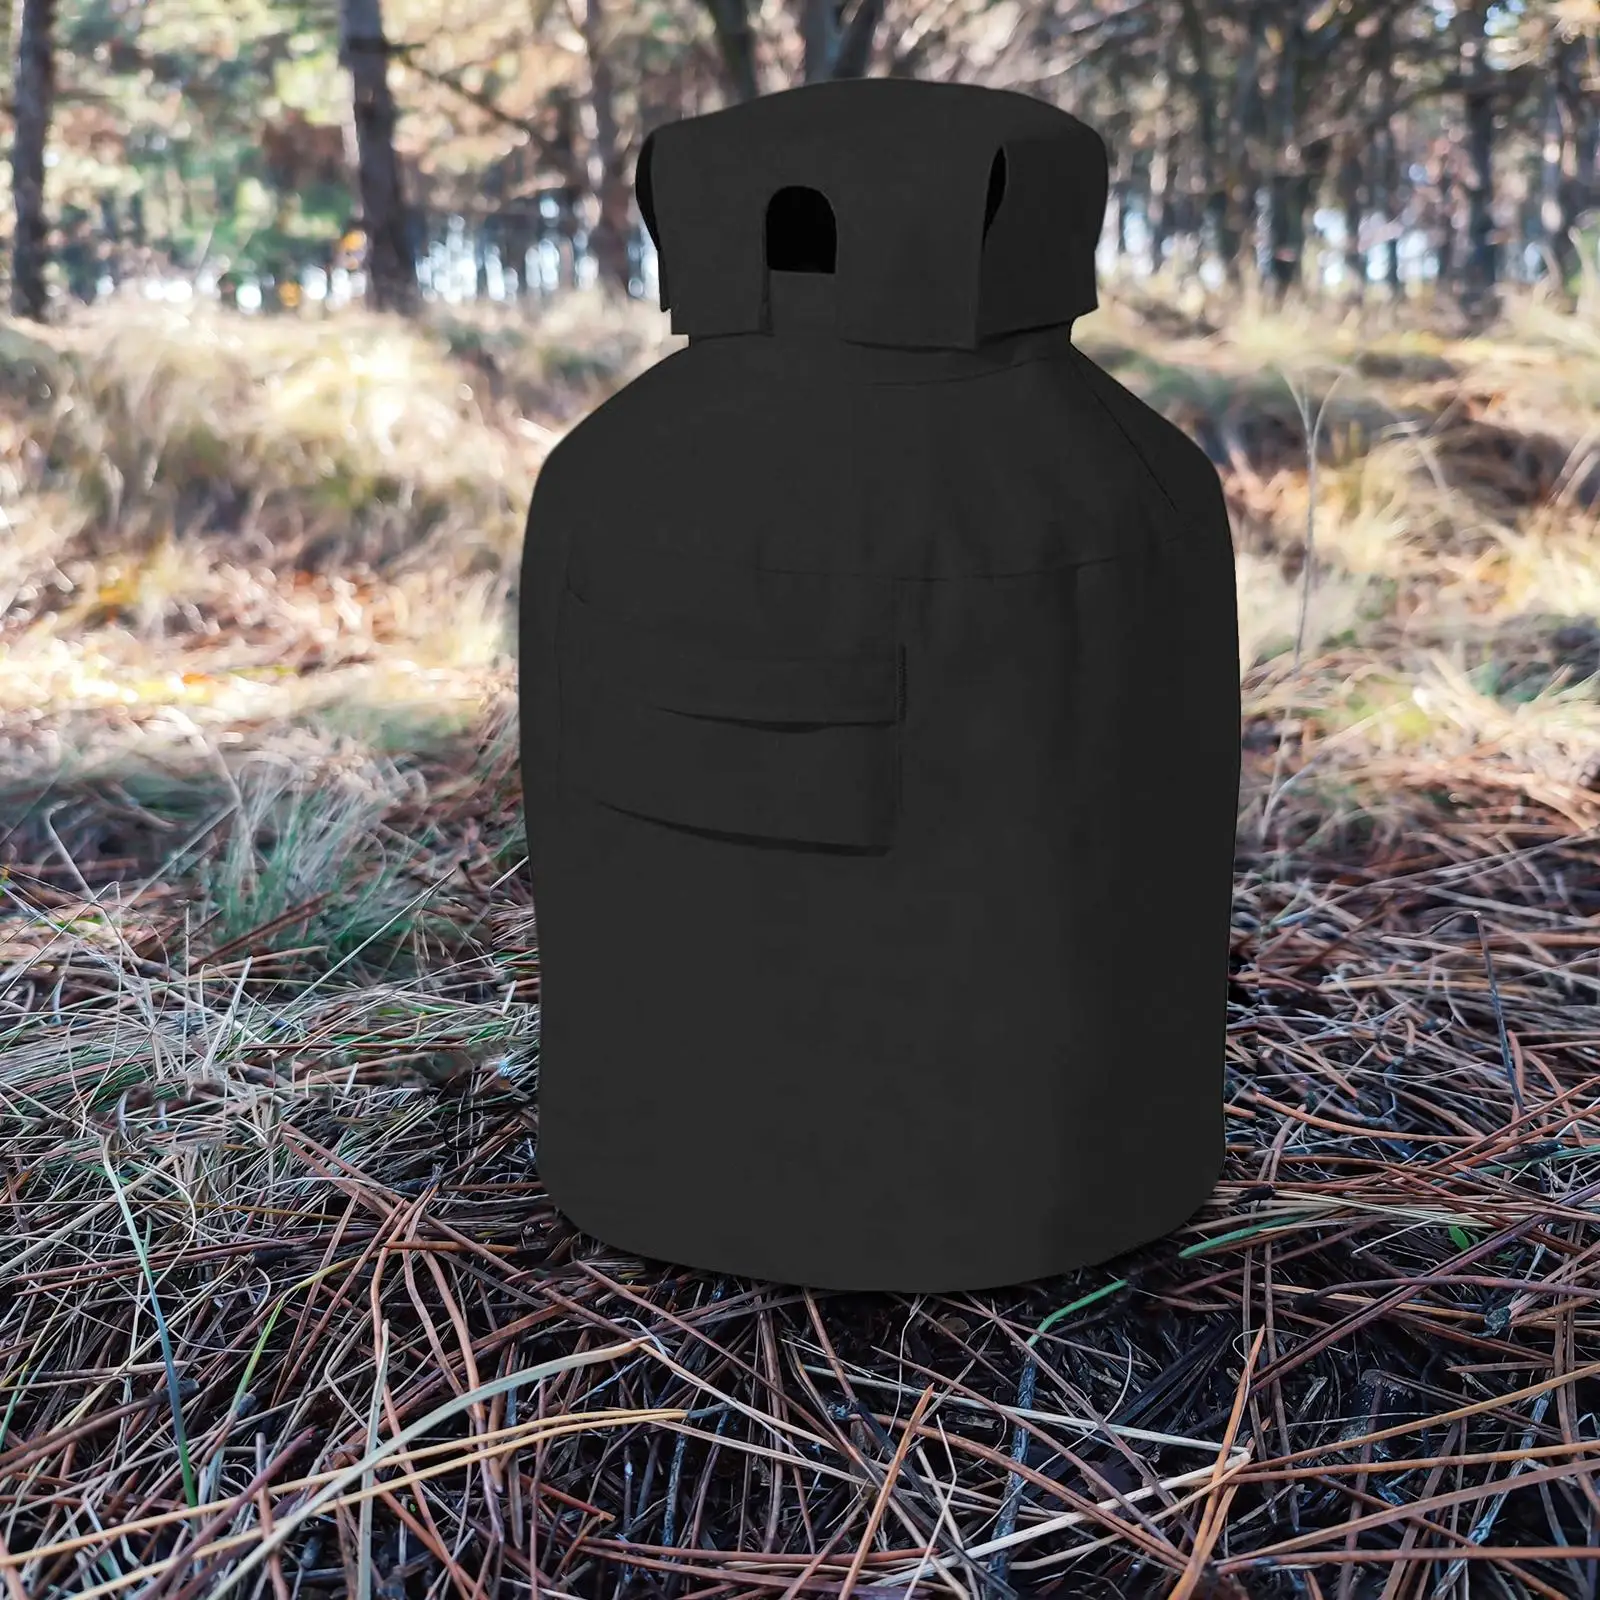 Gas Tank Cover Tank Cylinder Pocket Dust Proof Storage Carrier Gas Canister Cover Storage Bag for Outdoor Cooking Traveling